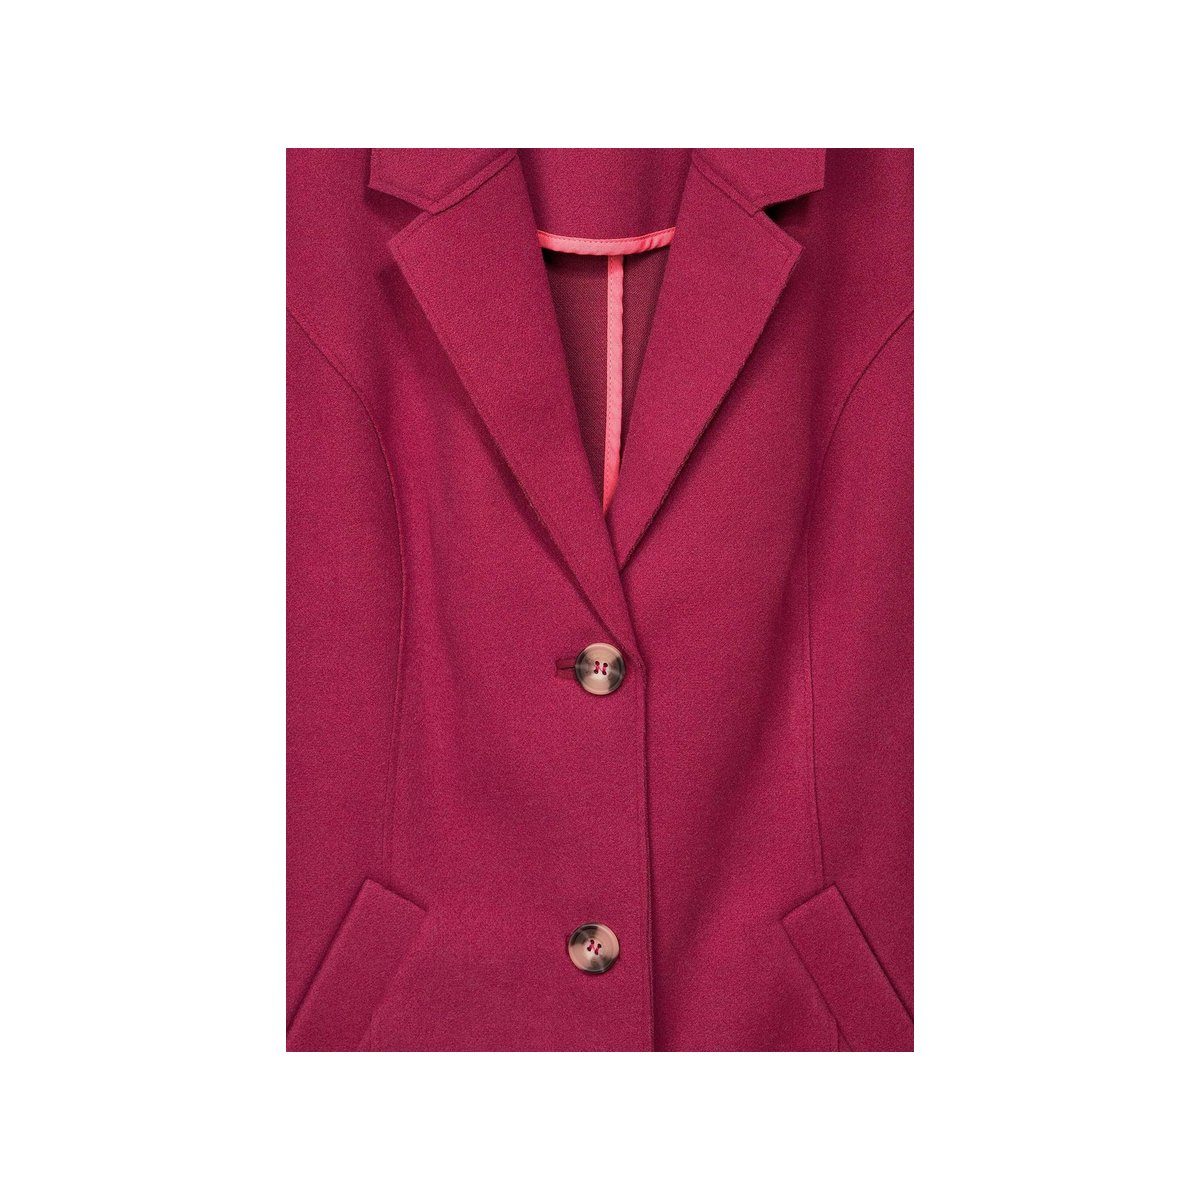 STREET ONE Outdoorjacke rot passform red peony textil (1-St)